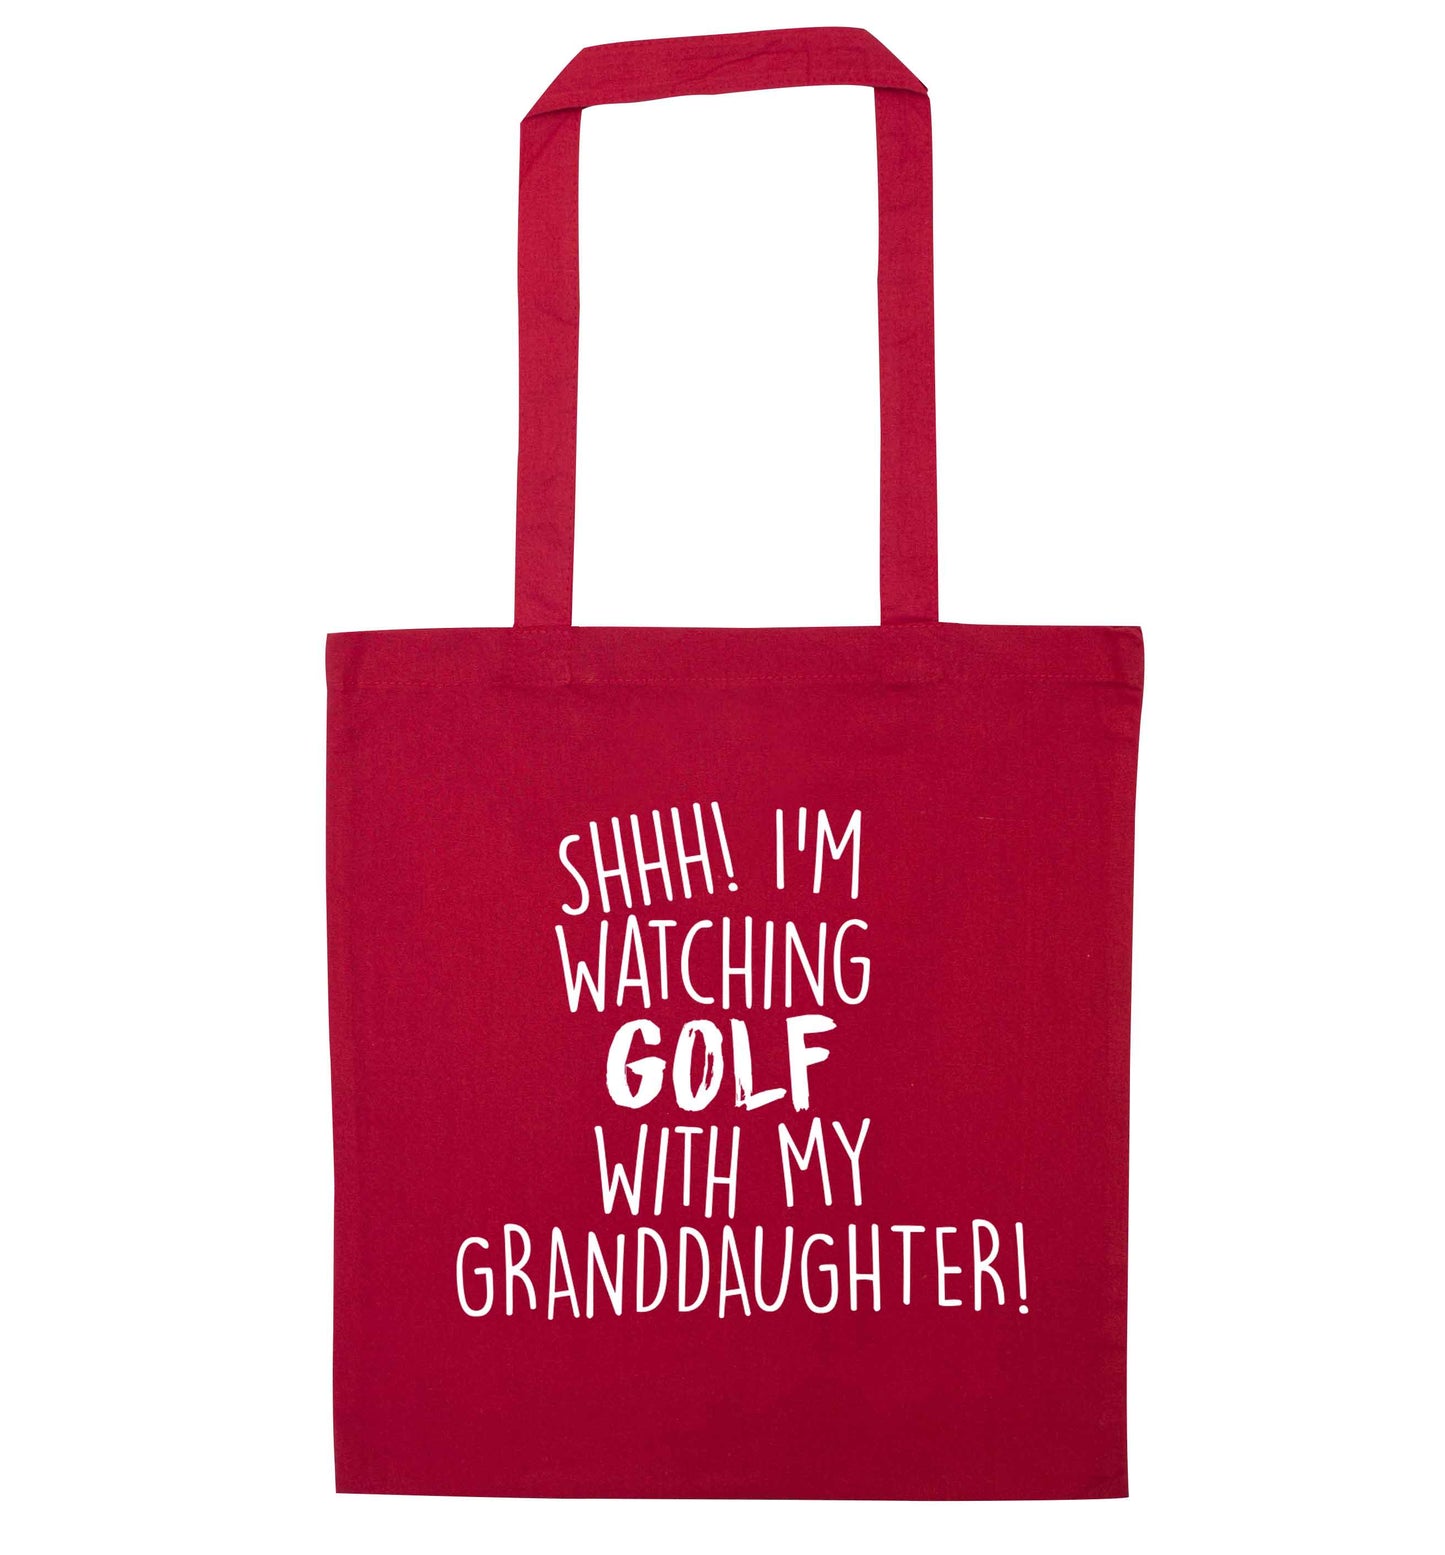 Shh I'm watching golf with my granddaughter red tote bag